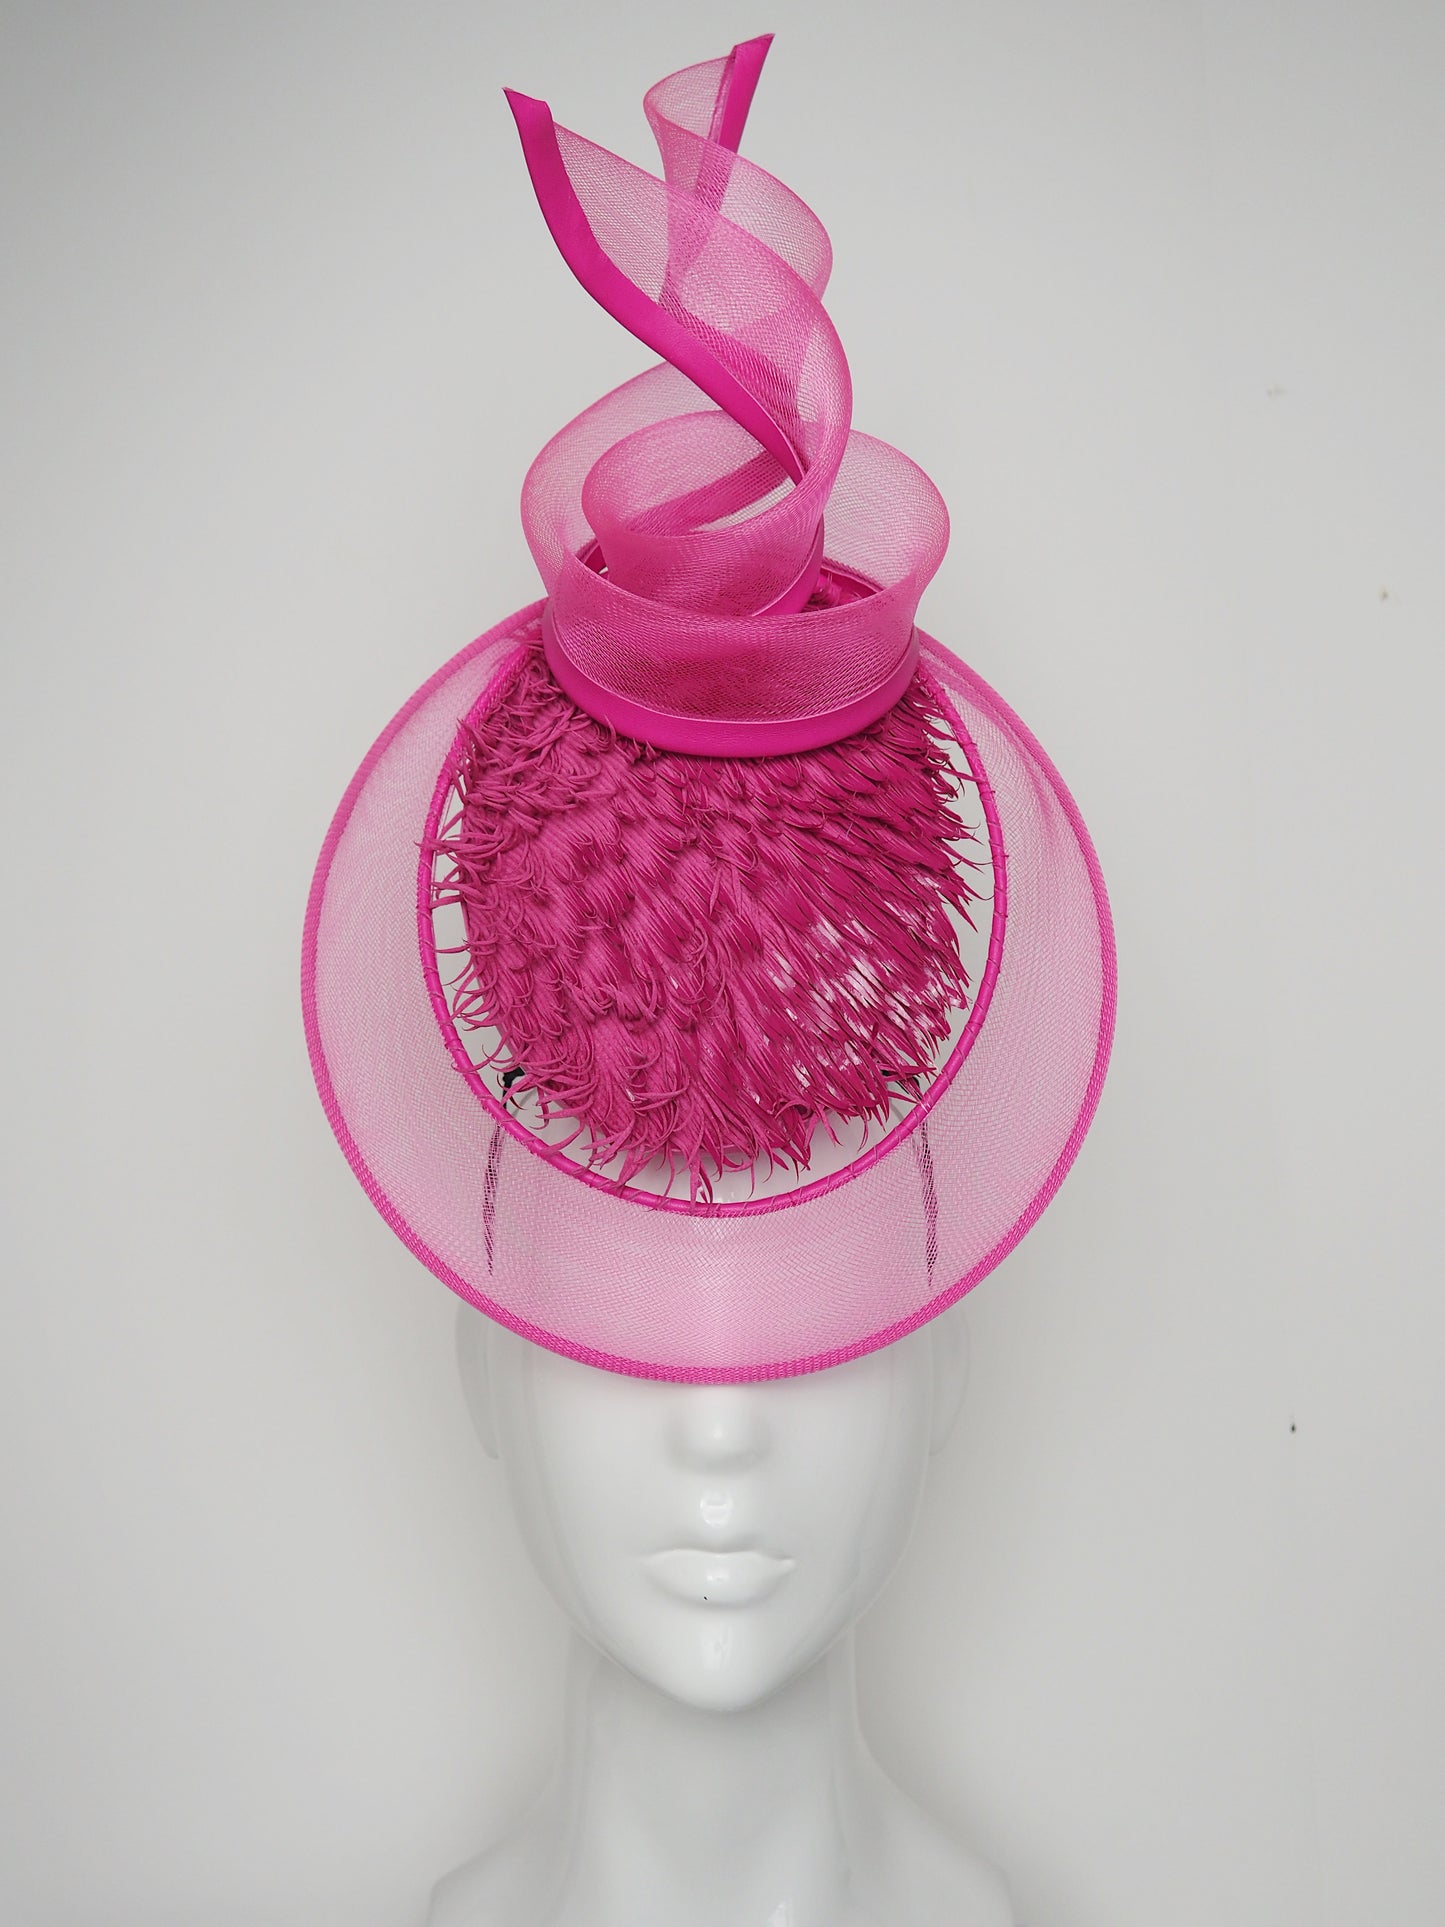 Tilt-a-whirl - Pink shredded patent leather percher with wired crinoline veil and swirl